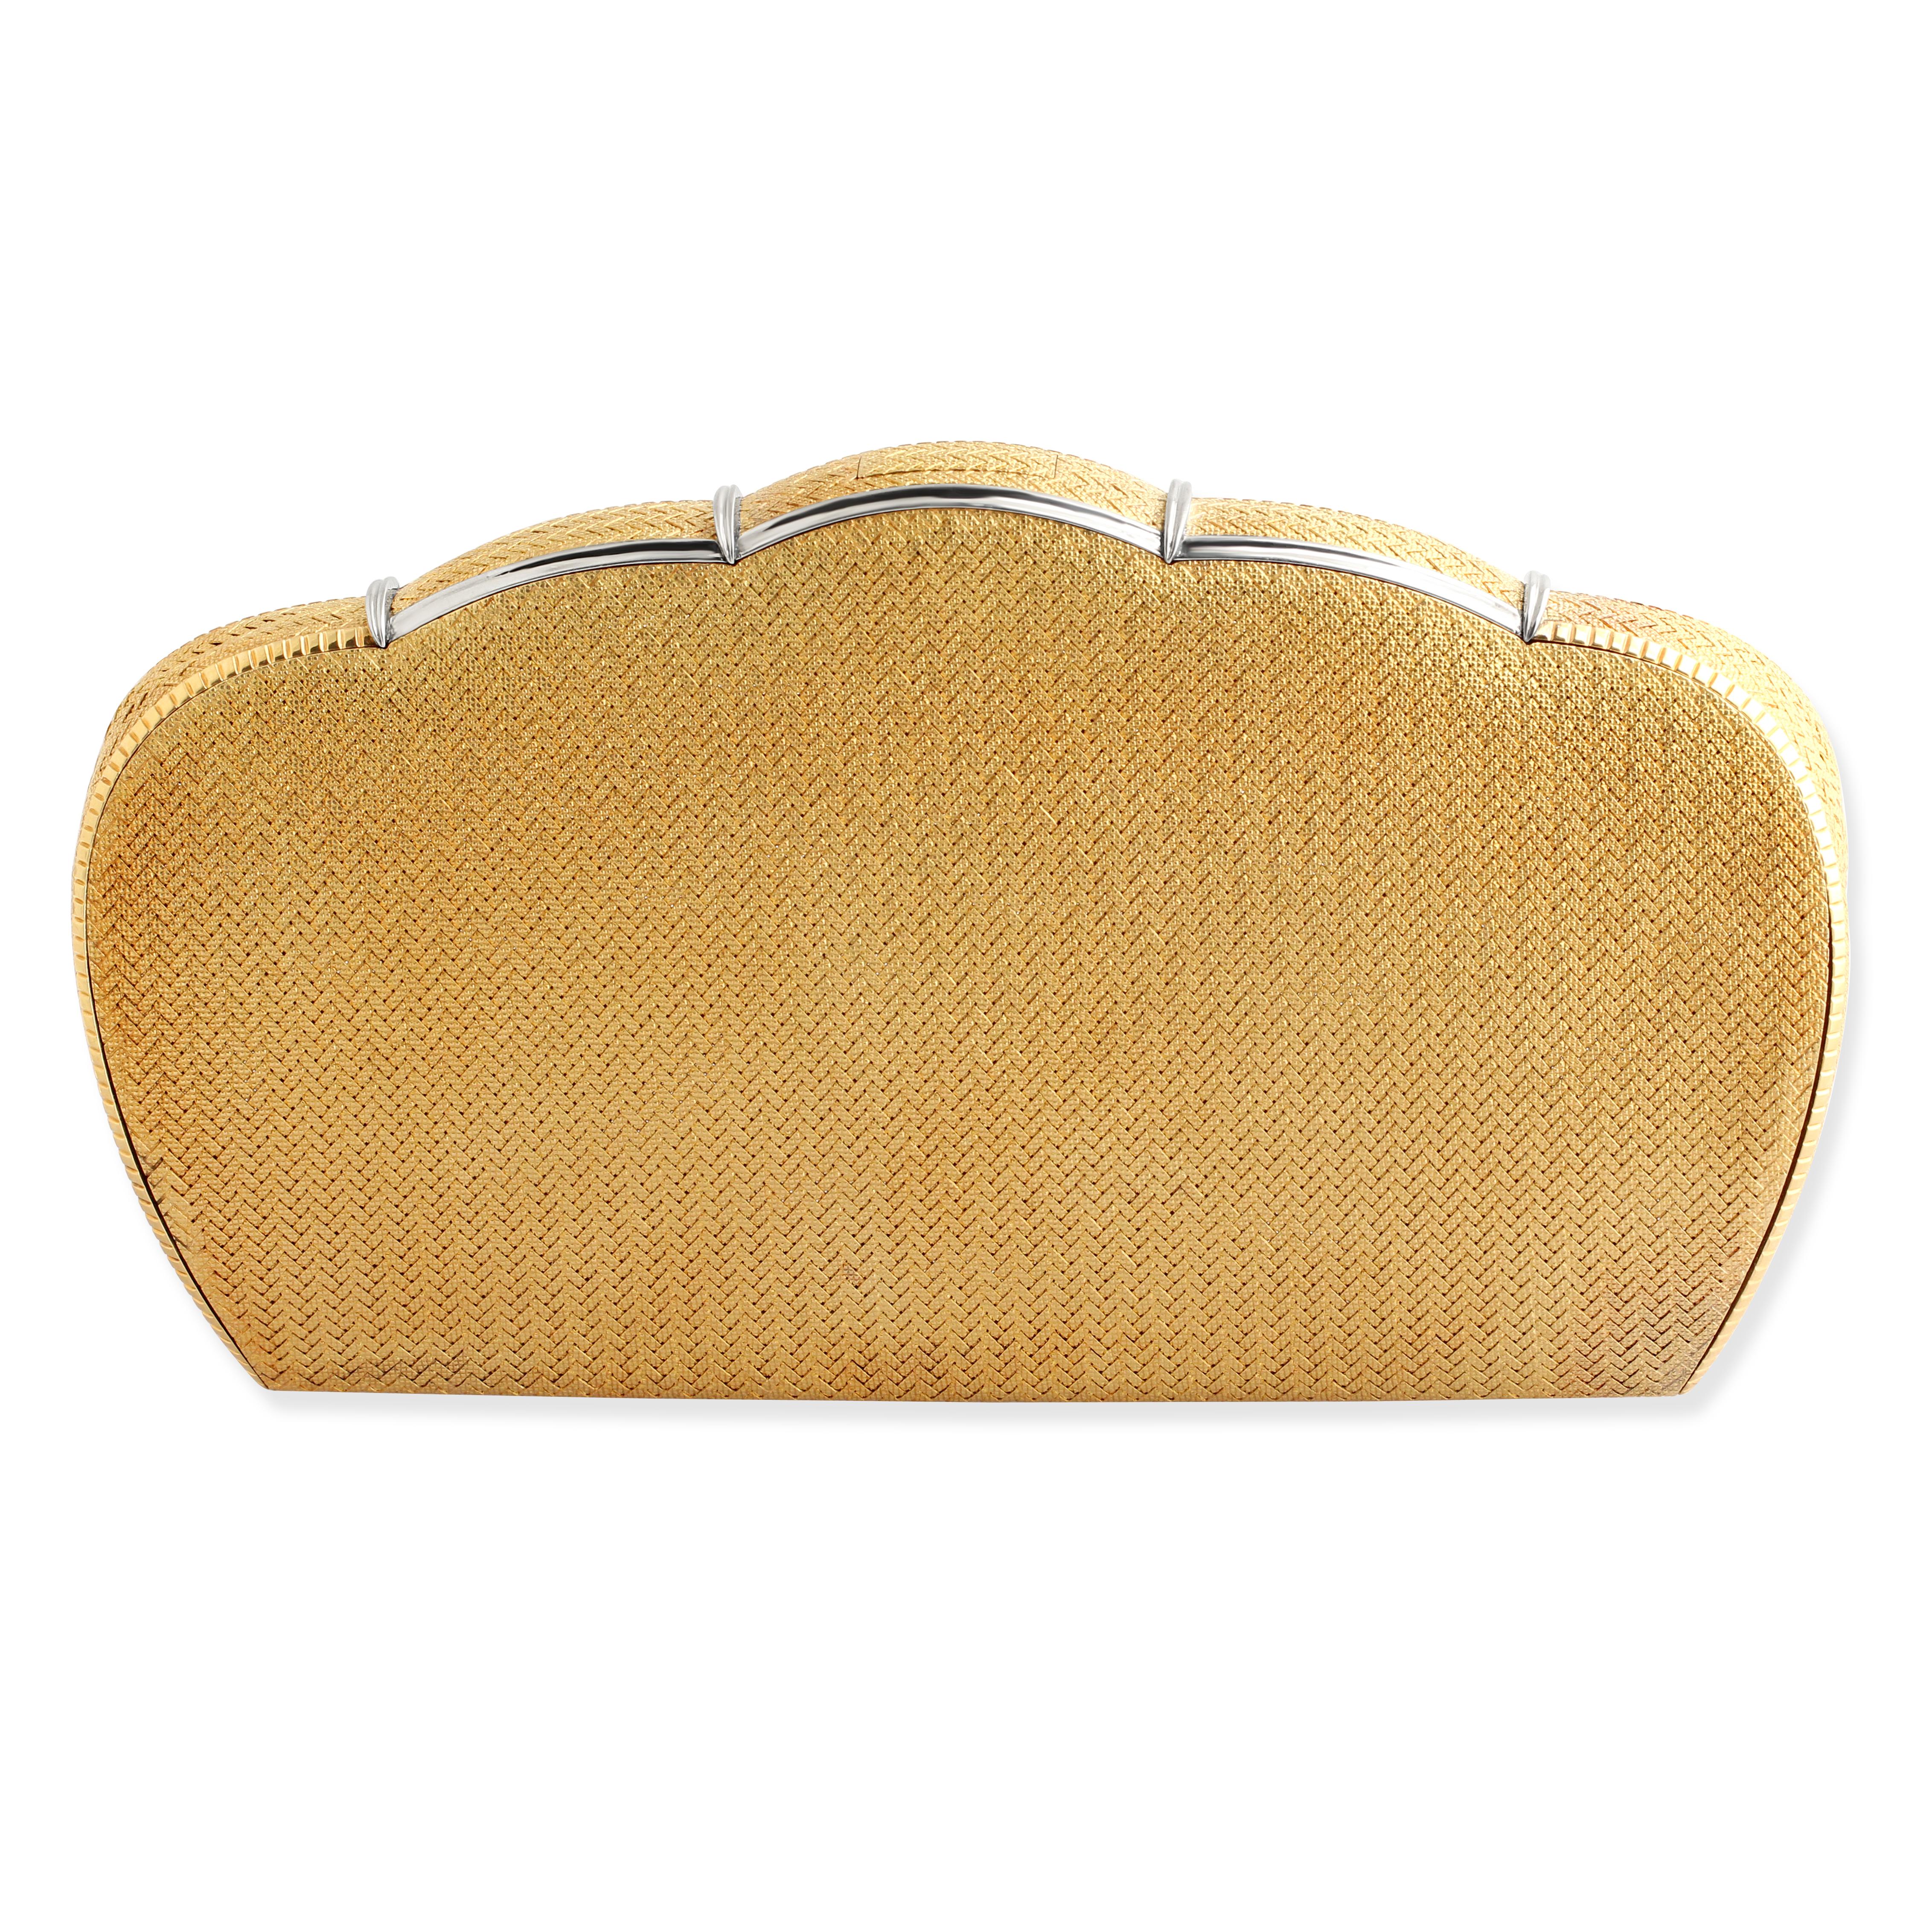 Bulgari 18K Gold Clutch Bag In Good Condition For Sale In London, GB